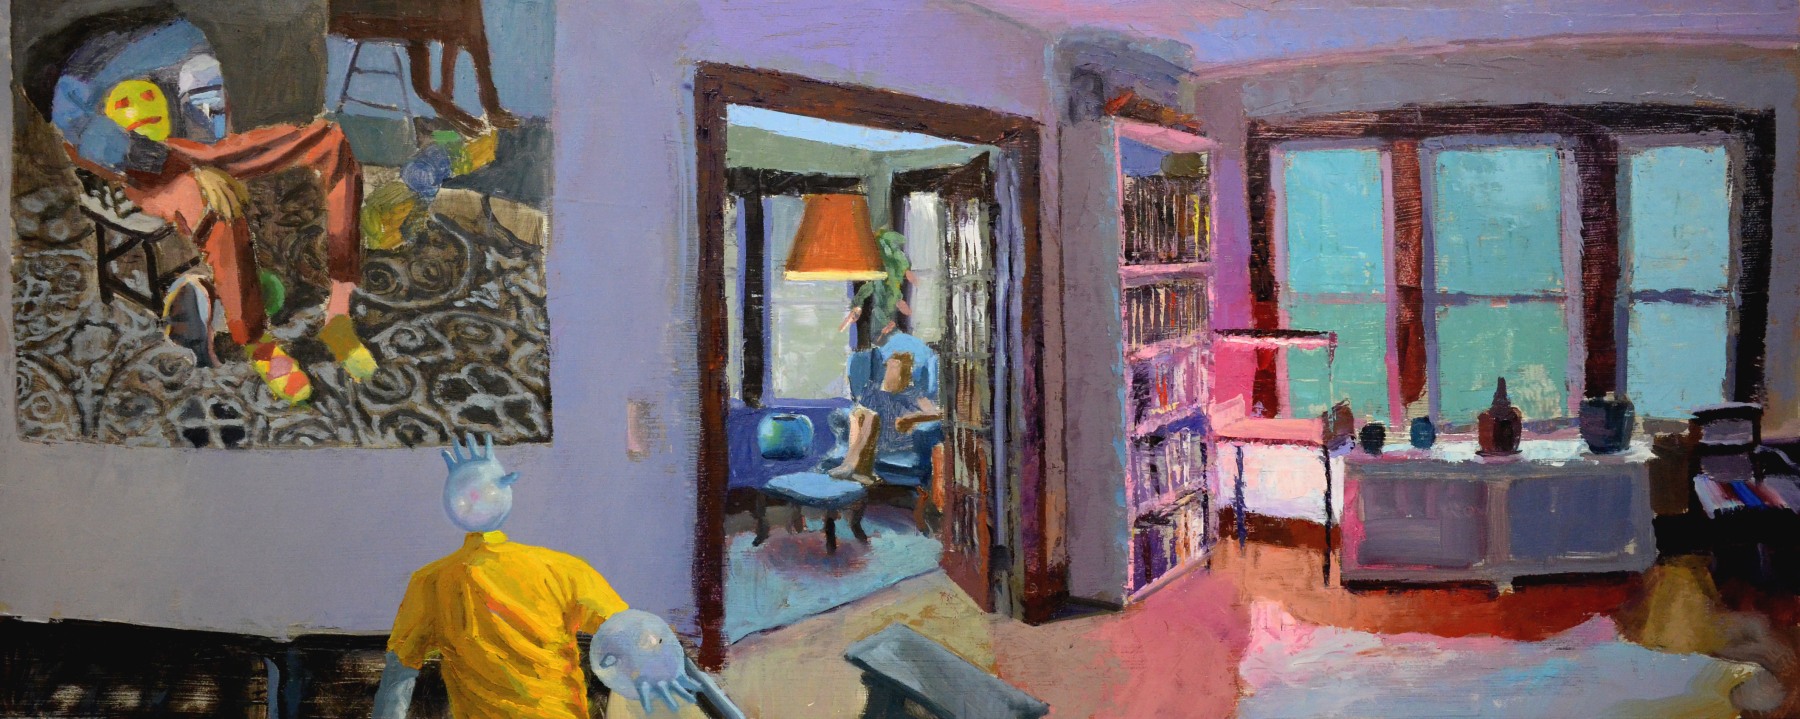 Living Room, 2020

Oil on panel

13h x 33w in